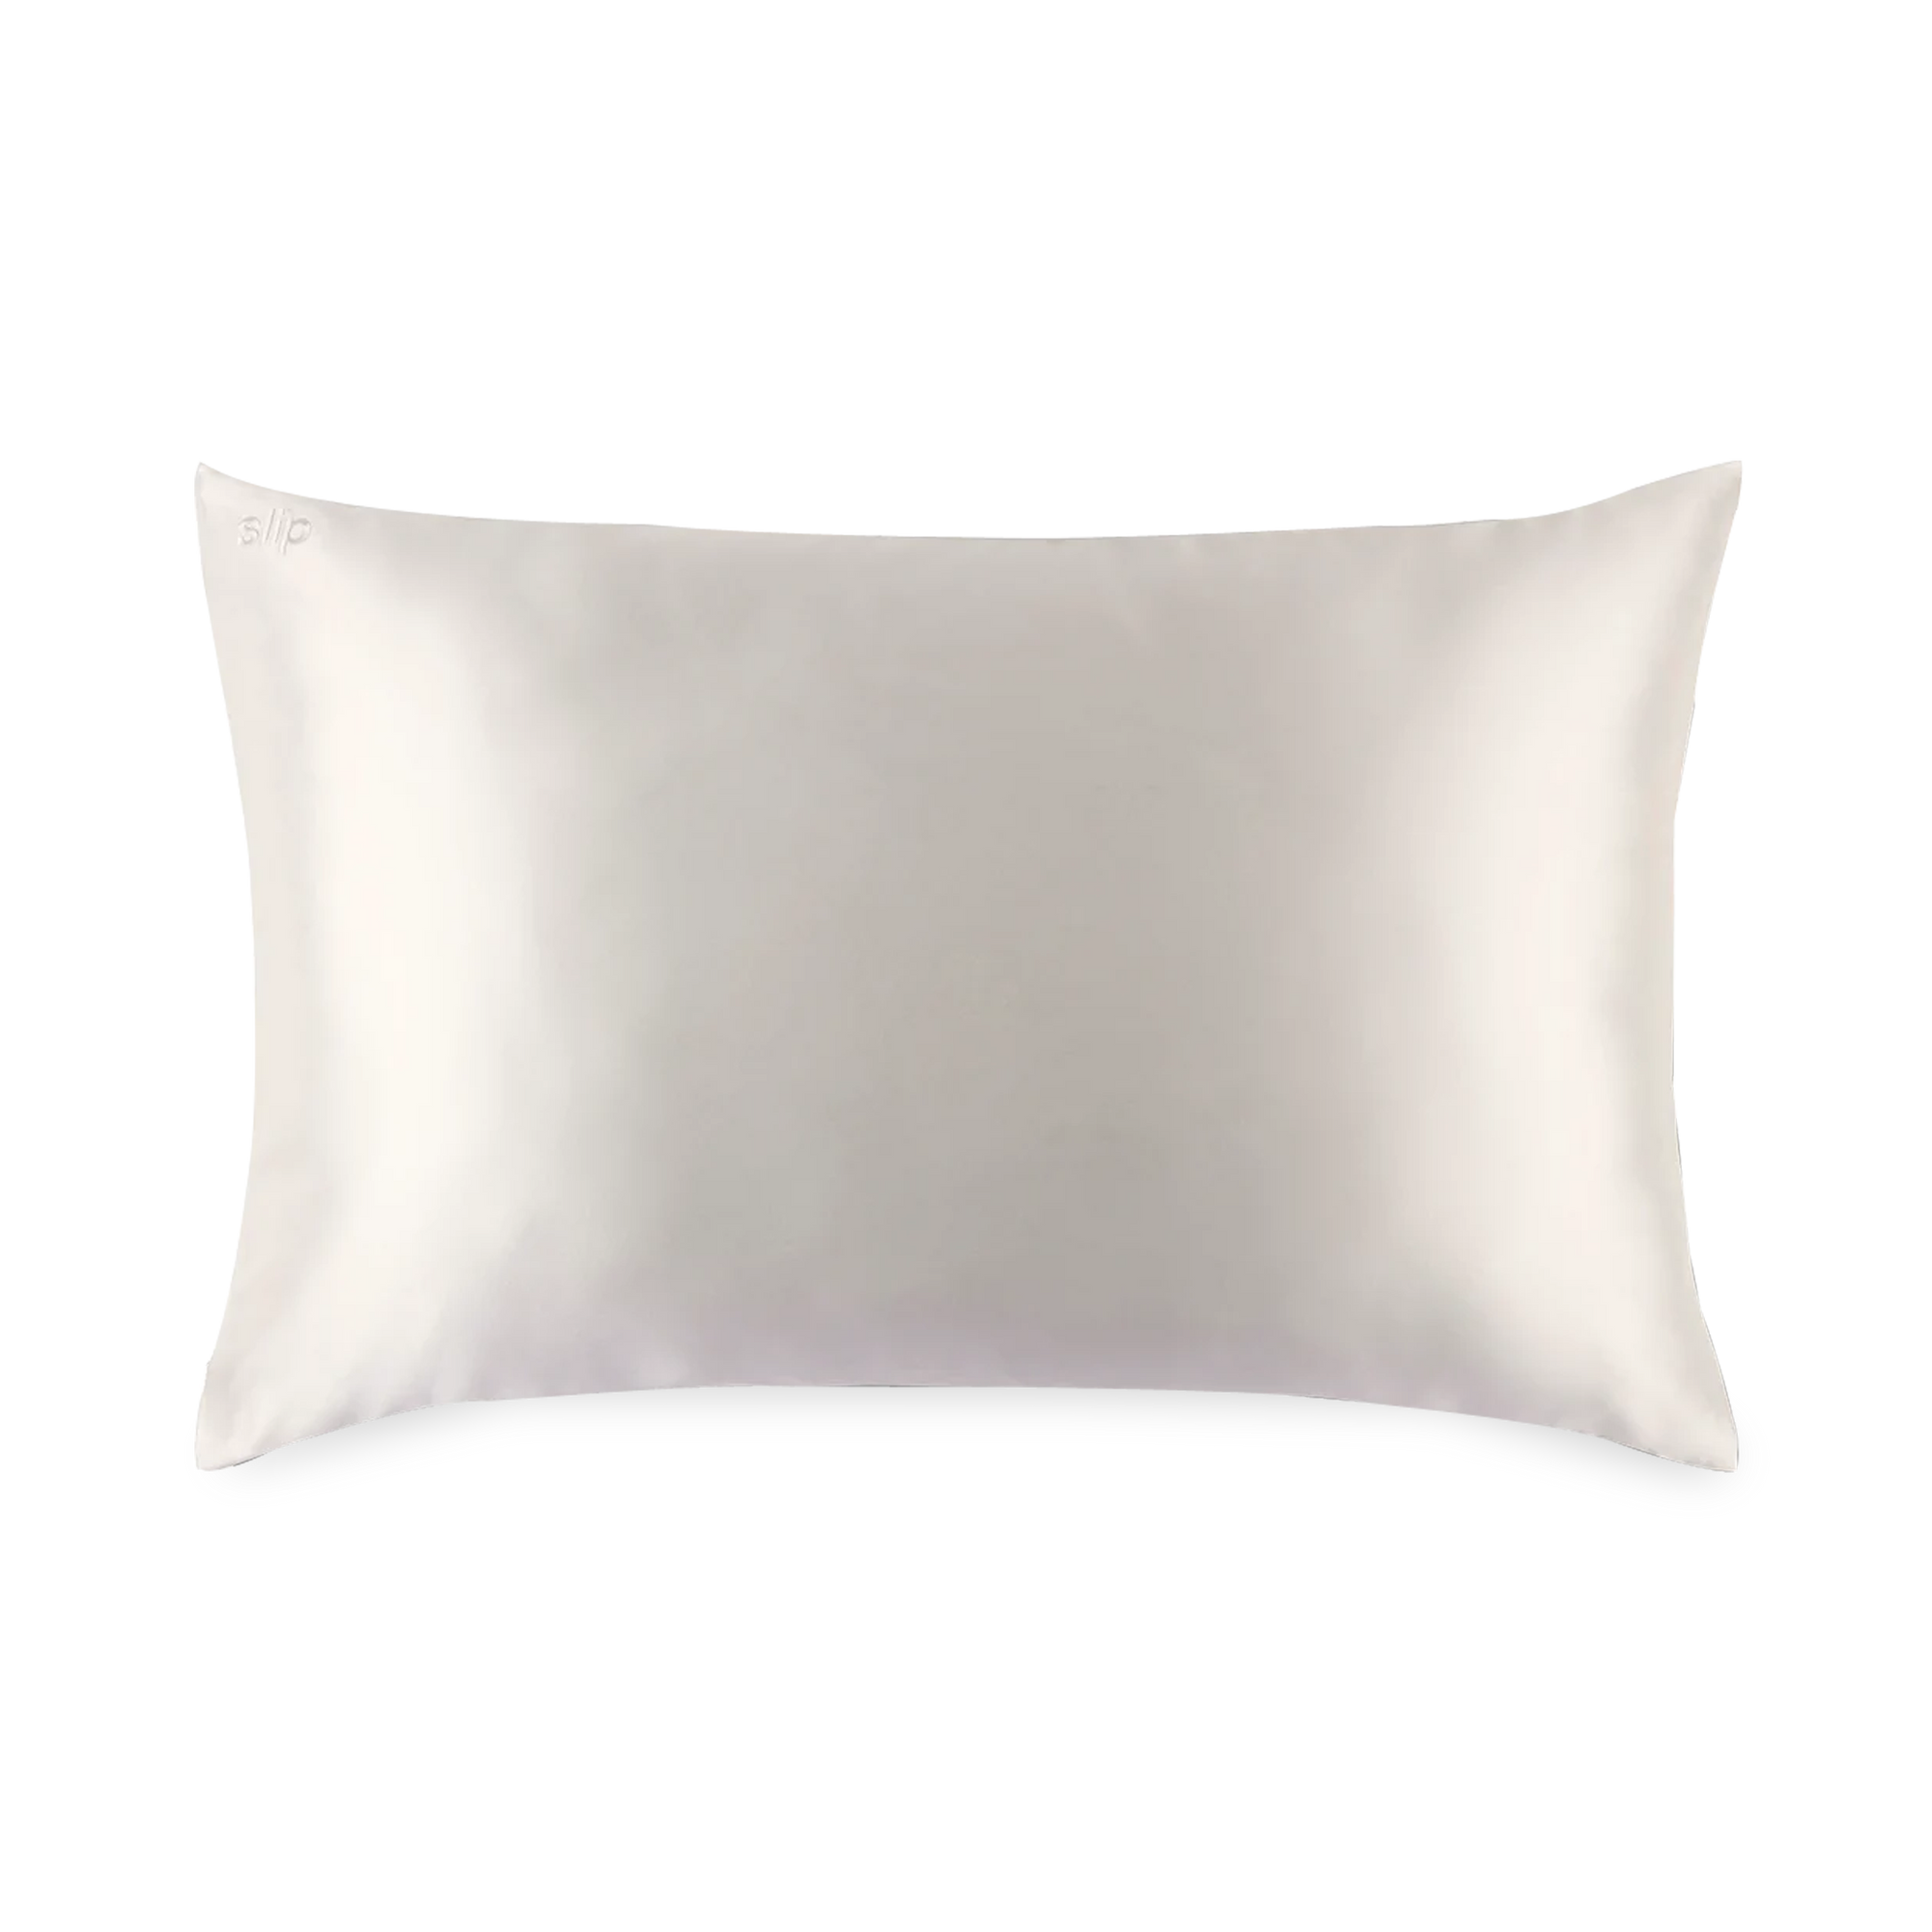 The Silk Pillowcase is made with the highest grade (6A) long fiber mulberry silk, with a thickness of 22 momme and non-toxic dyes.